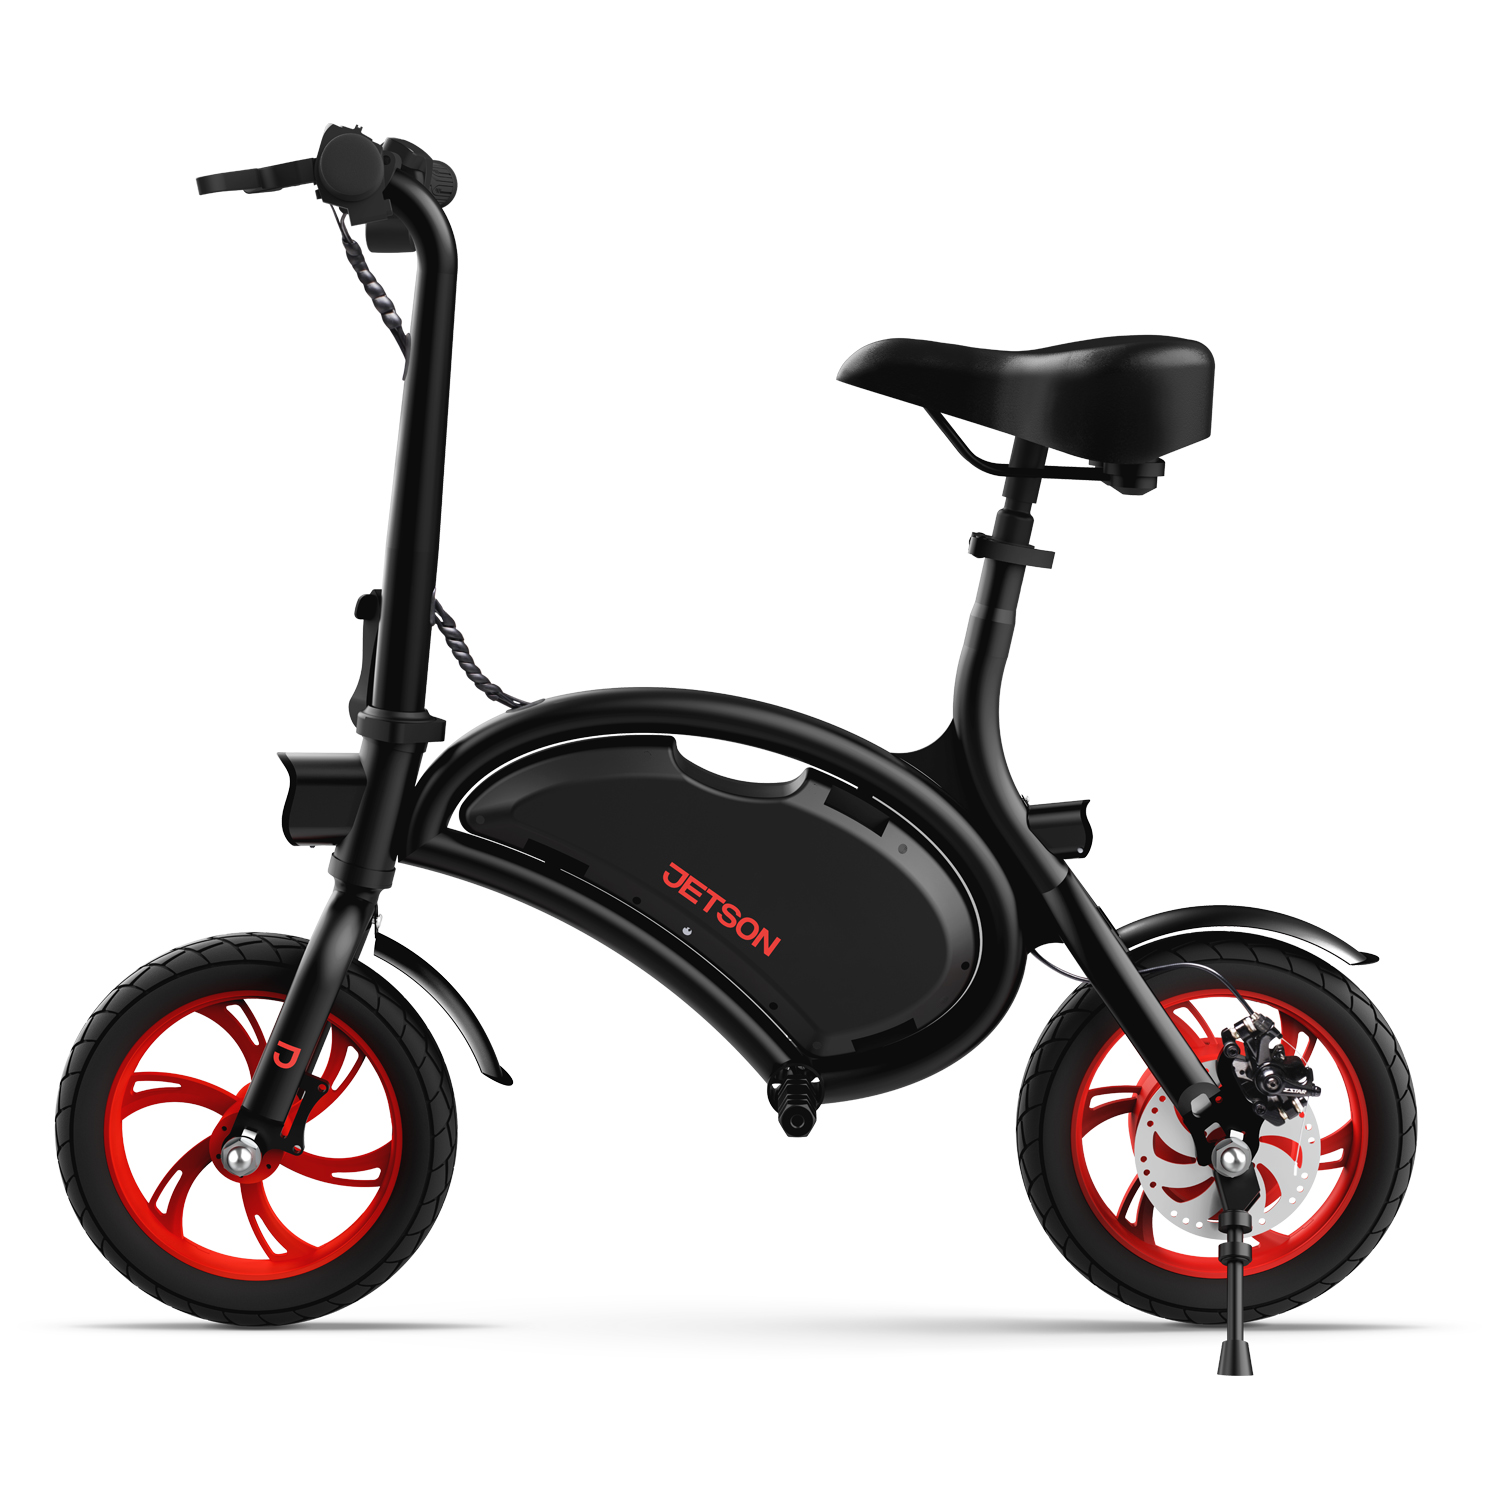 Jetson Bolt Folding Electric Ride-On with Twist Throttle, Cruise Control, Up to 15.5 mph, Black - image 1 of 15